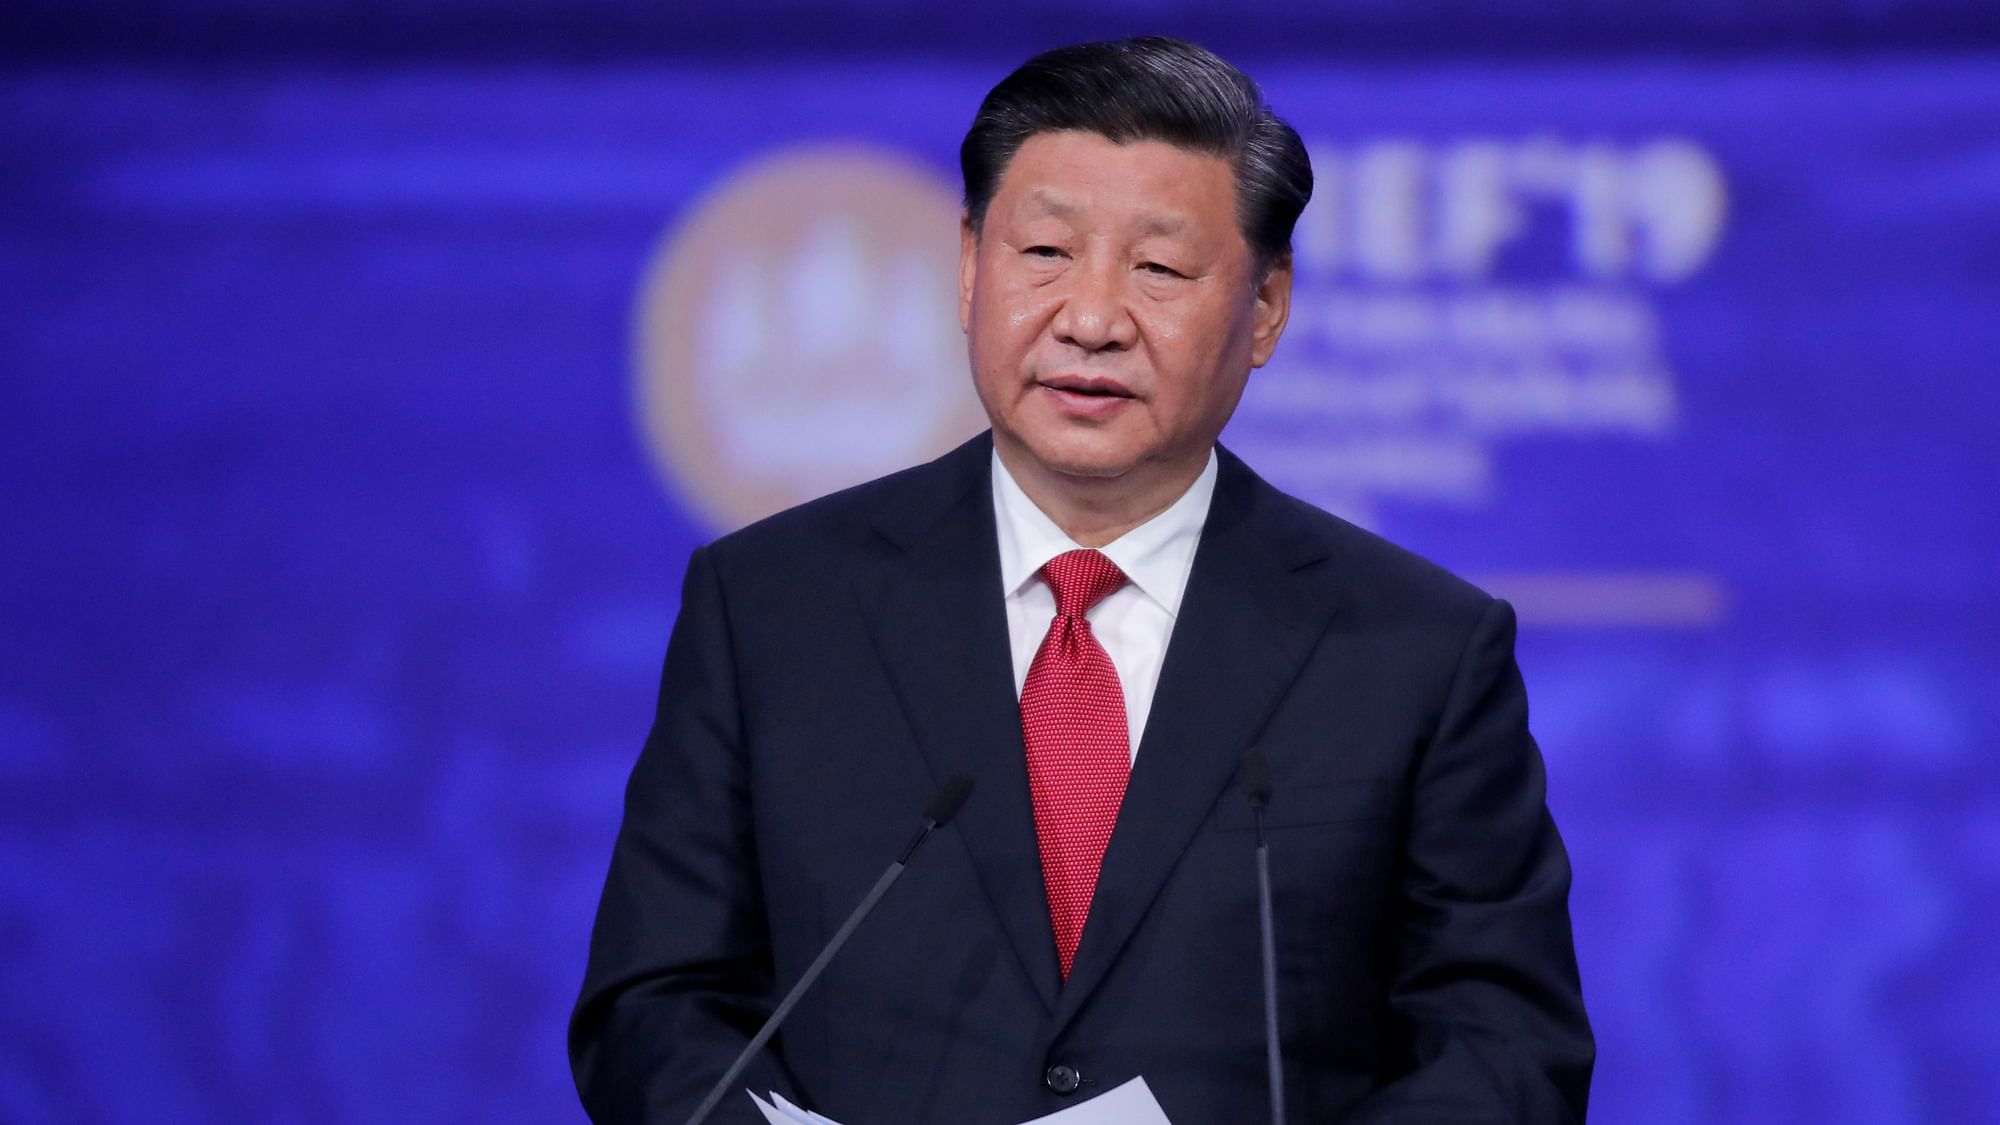 Chinese President Xi Jinping addresses the St Petersburg International Economic Forum in St Petersburg, Russia Friday, 7 June 2019.